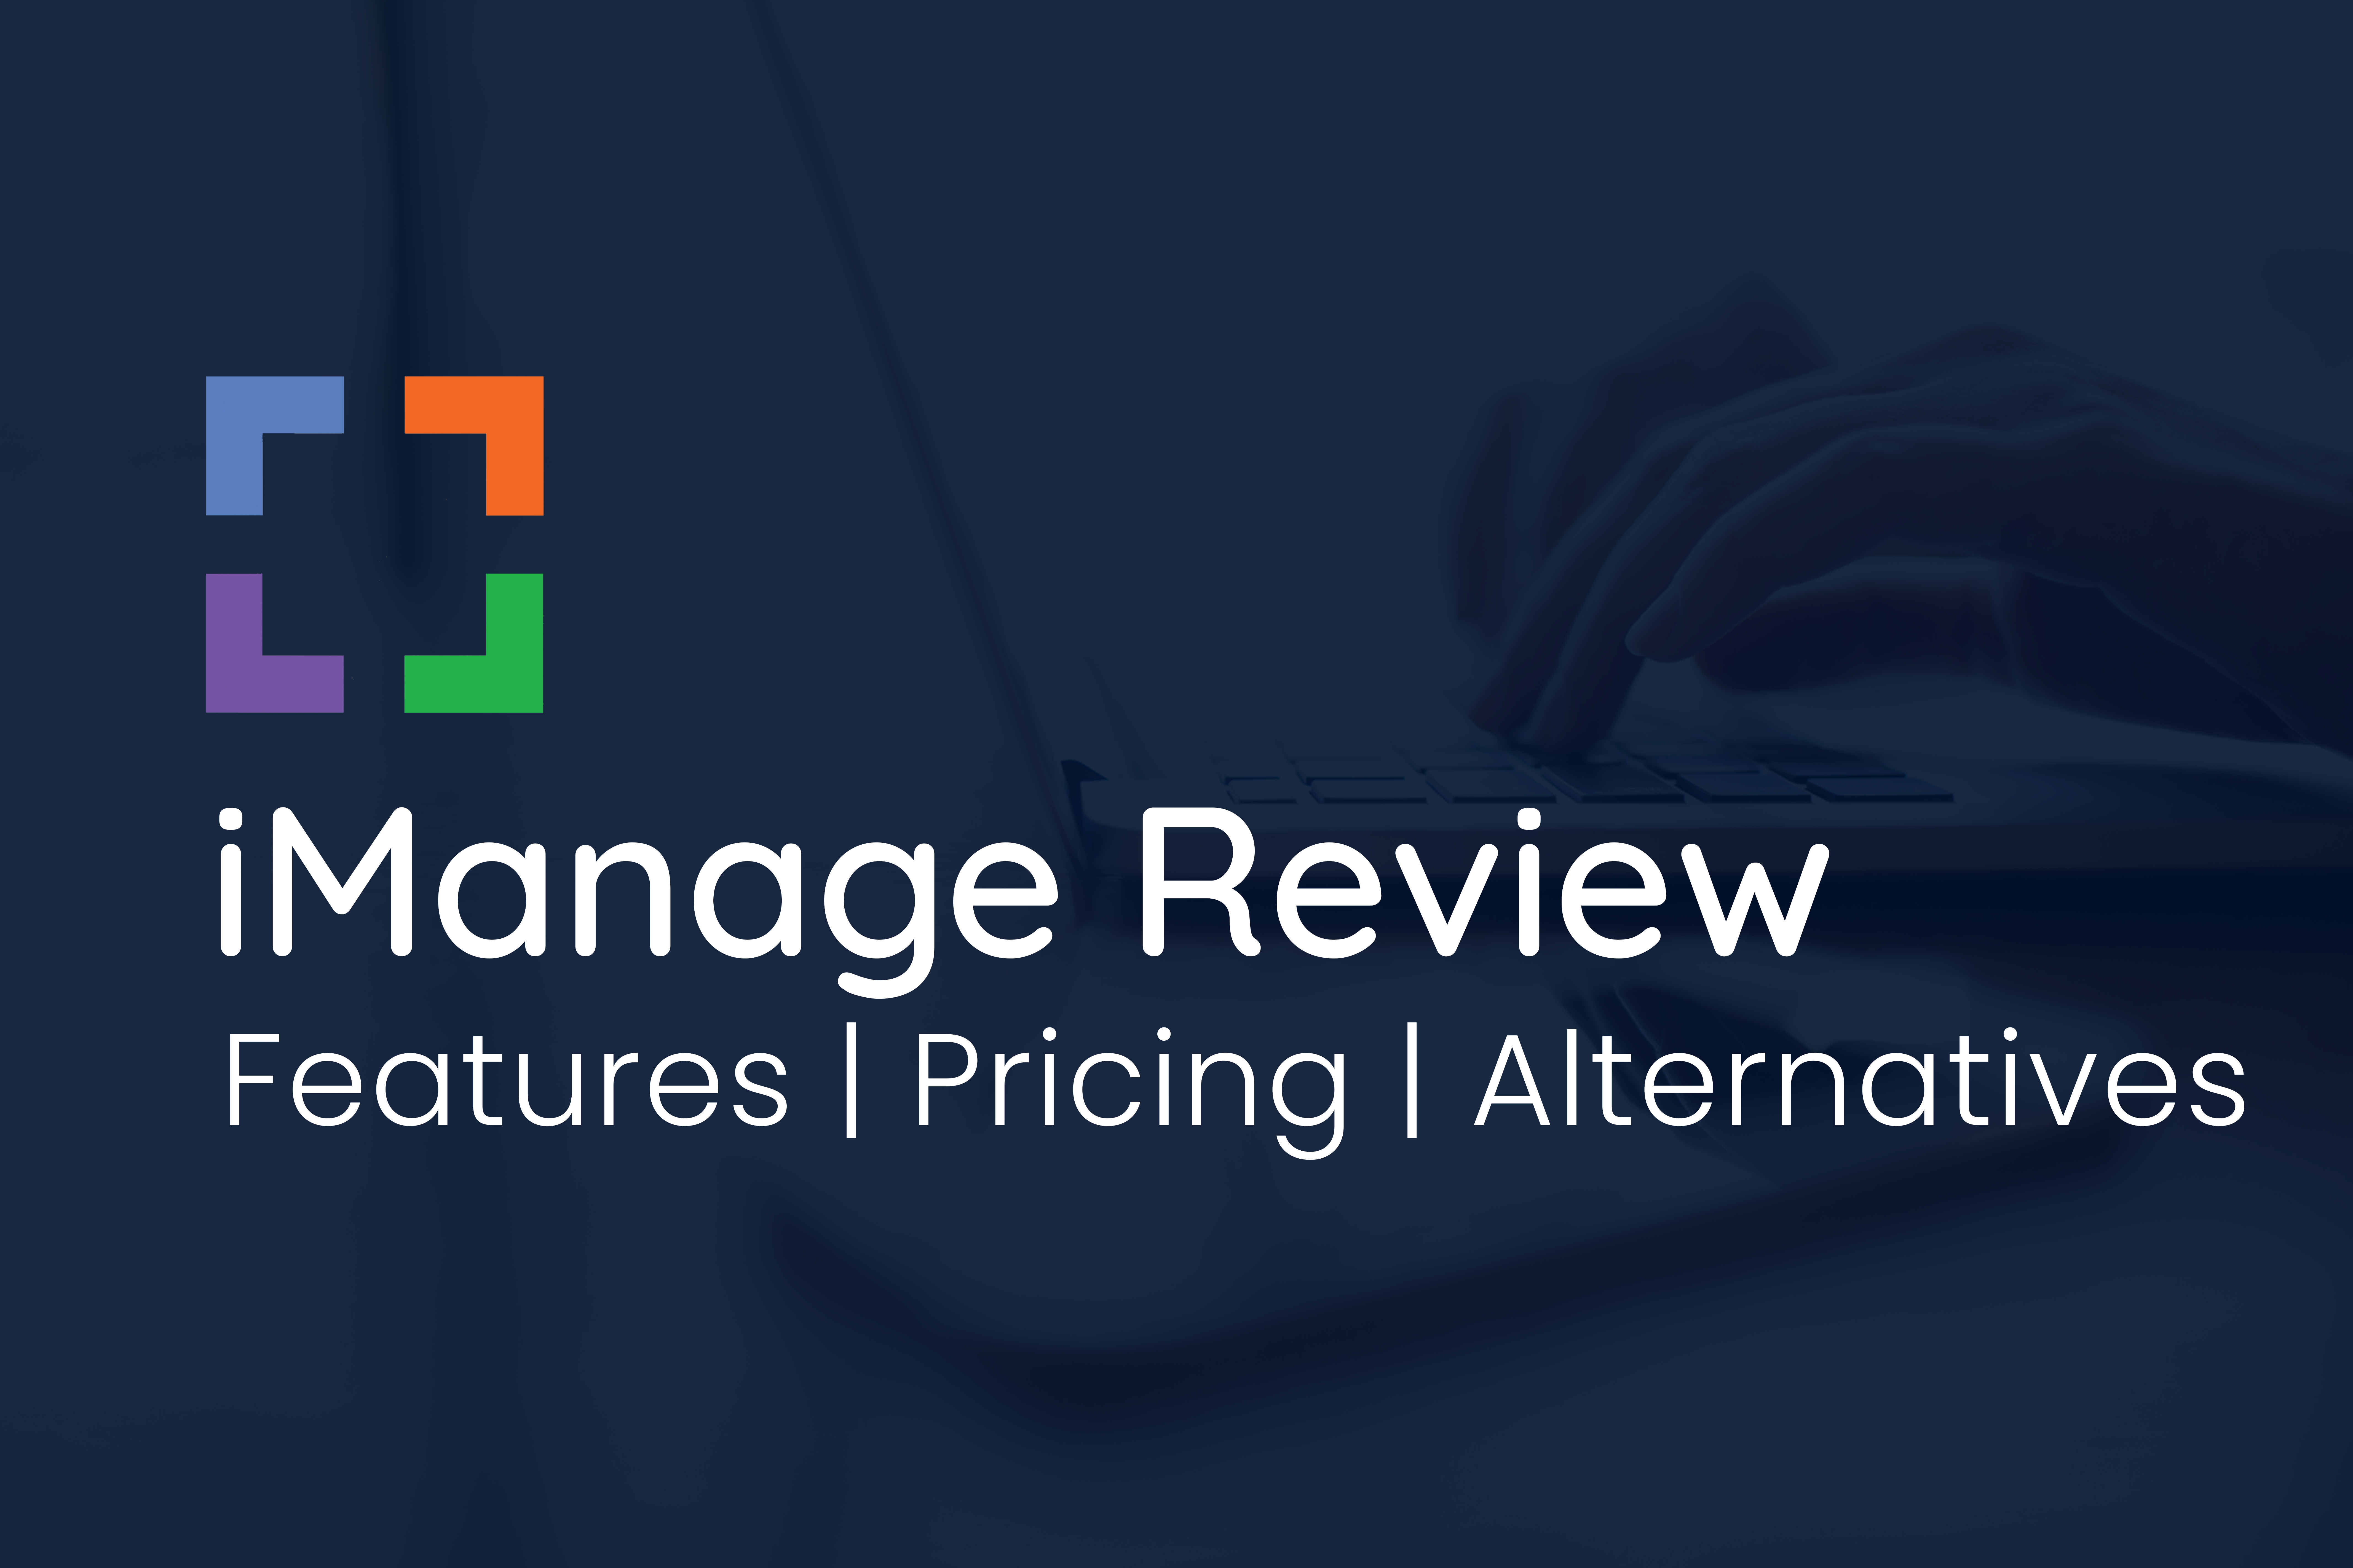 iManage Software Reviews